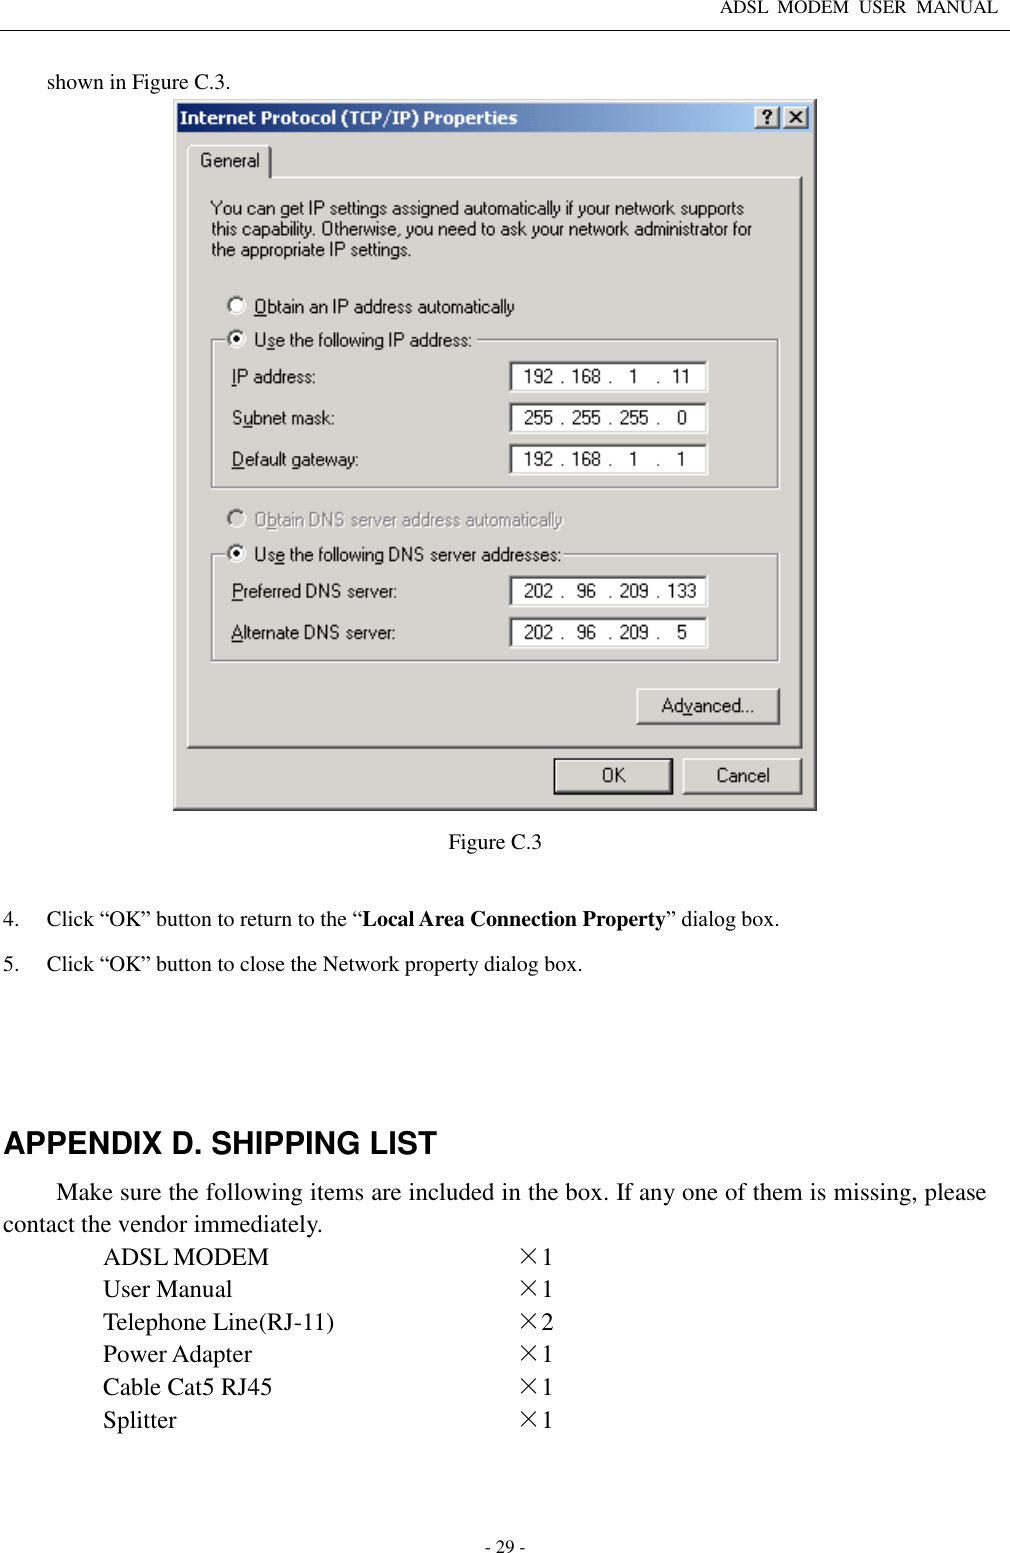 ADSL  MODEM  USER  MANUAL   - 29 - shown in Figure C.3.    Figure C.3  4. Click “OK” button to return to the “Local Area Connection Property” dialog box. 5. Click “OK” button to close the Network property dialog box.     APPENDIX D. SHIPPING LIST Make sure the following items are included in the box. If any one of them is missing, please contact the vendor immediately. ADSL MODEM ×1 User Manual ×1 Telephone Line(RJ-11) ×2 Power Adapter ×1 Cable Cat5 RJ45 ×1 Splitter ×1  